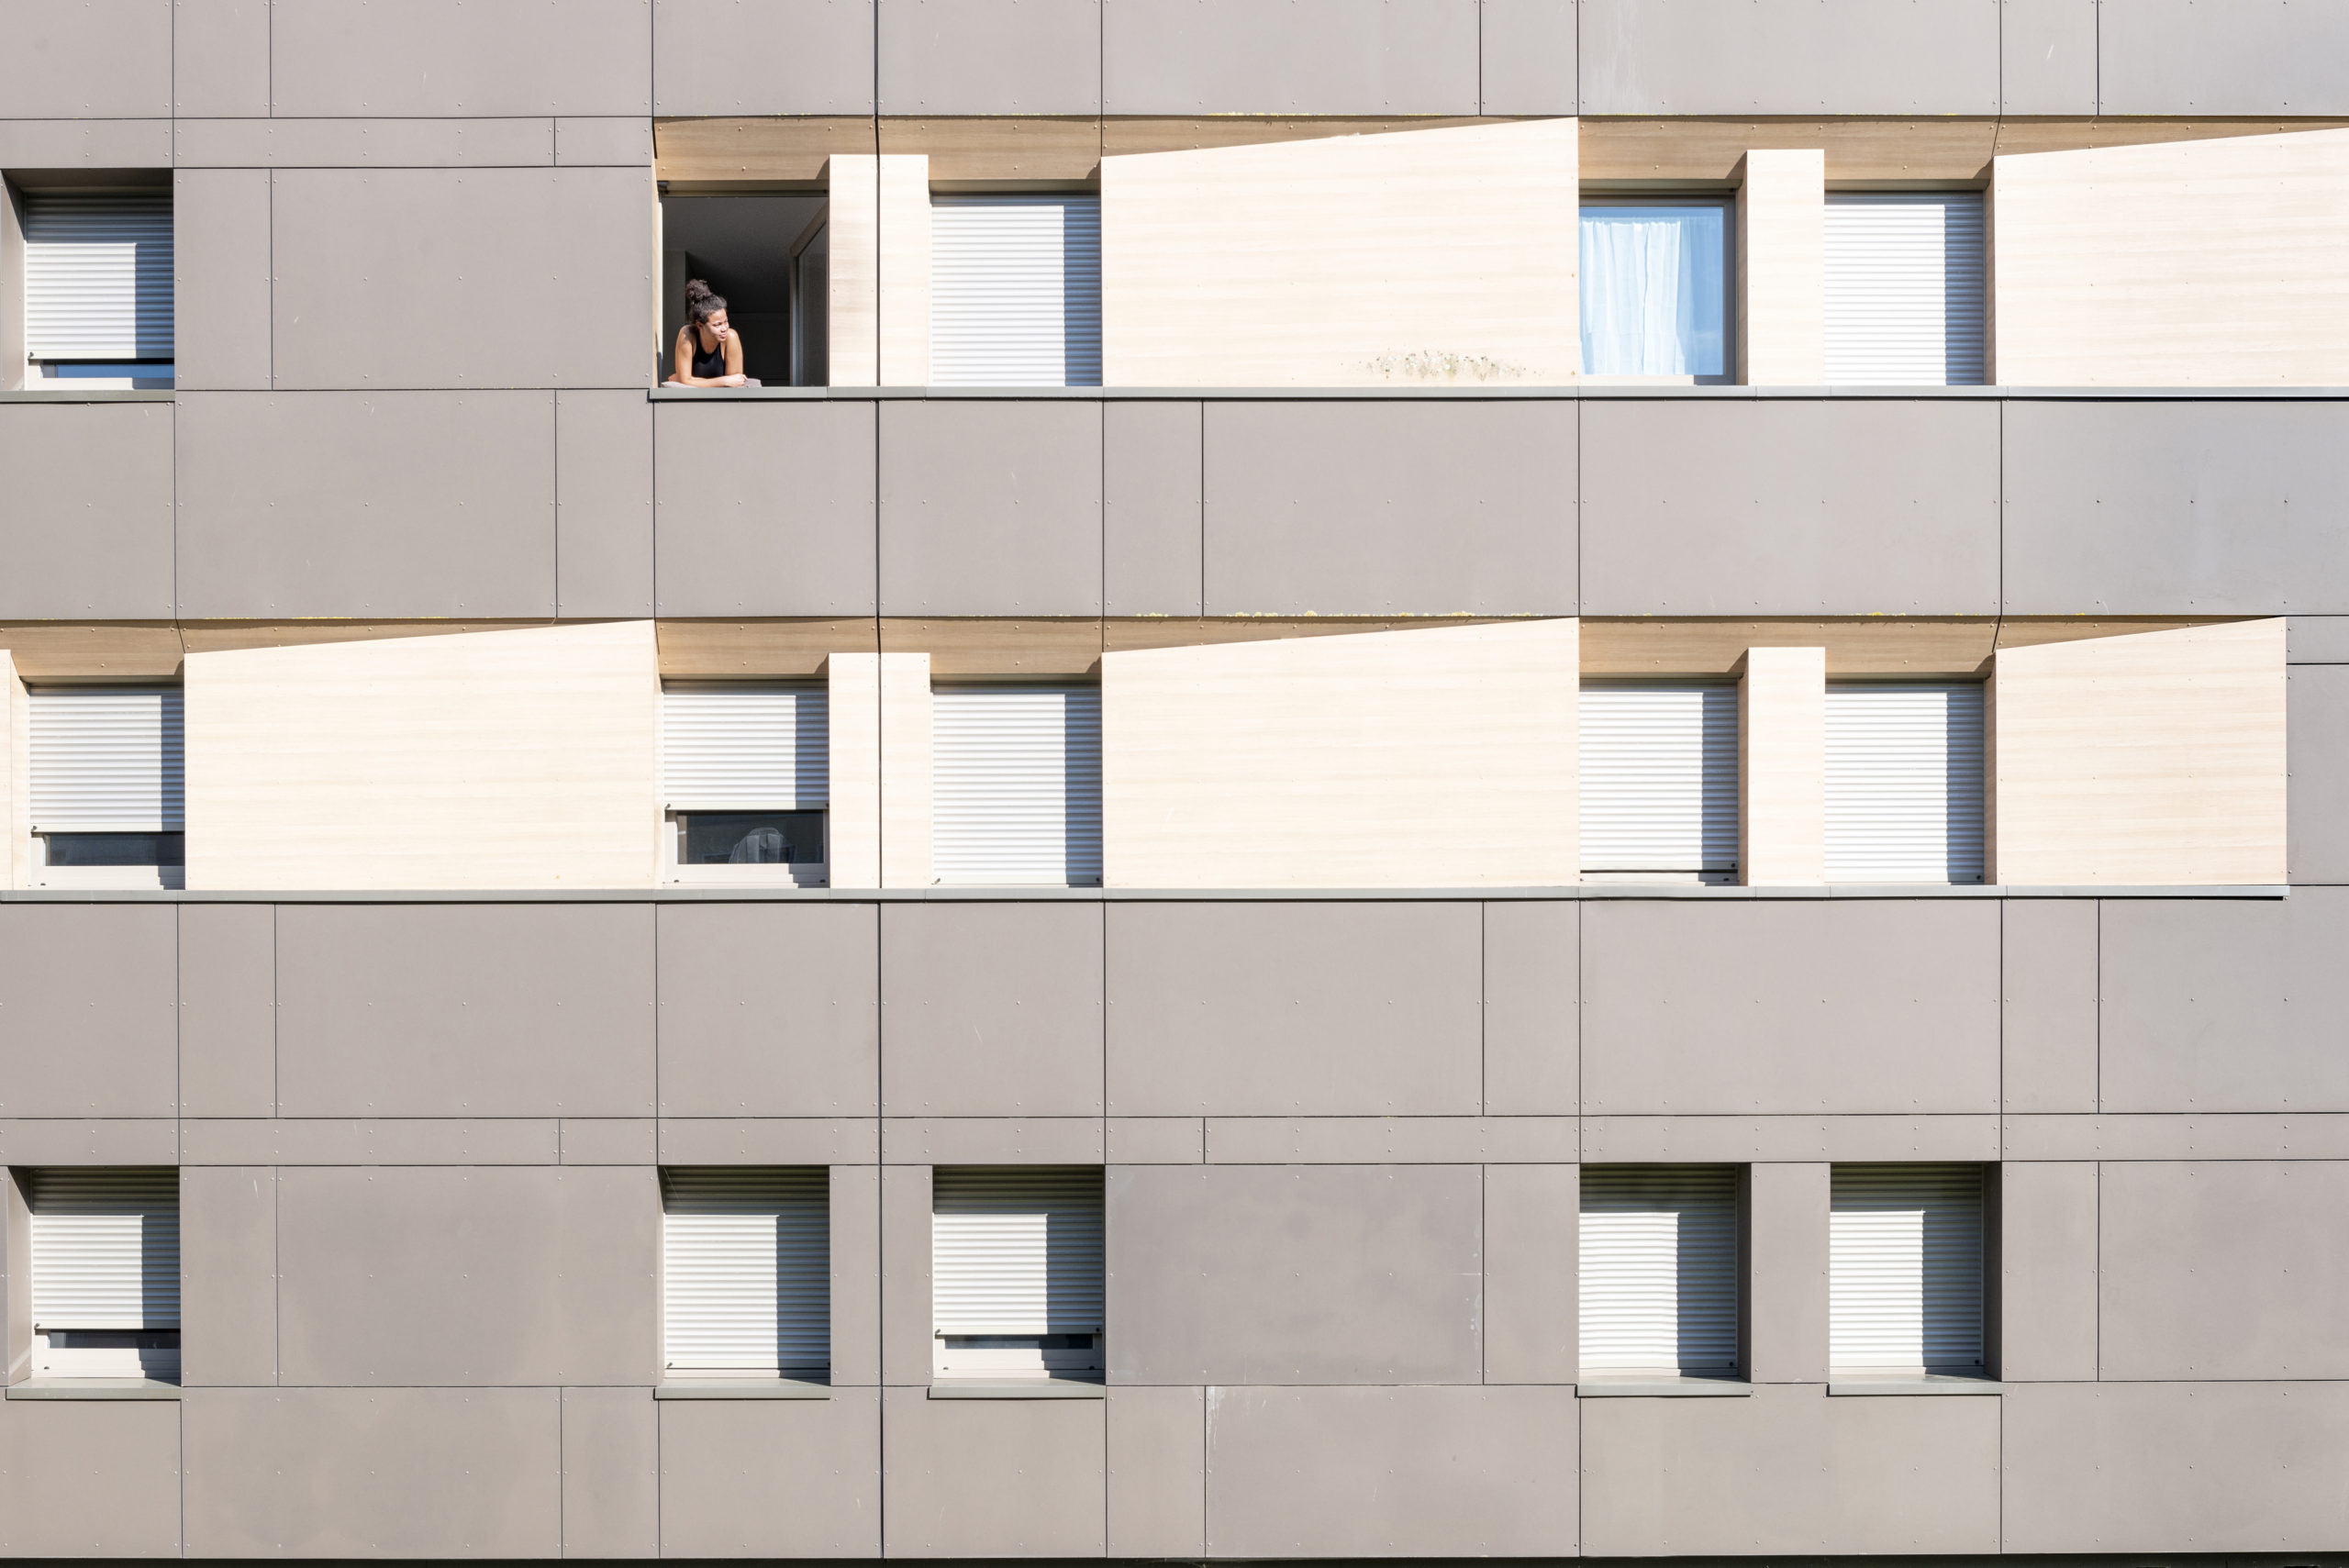 A student confined in a university residence in Poitiers takes in the air from her window. Many of the apartments seem to be empty, as the students have returned to their families.